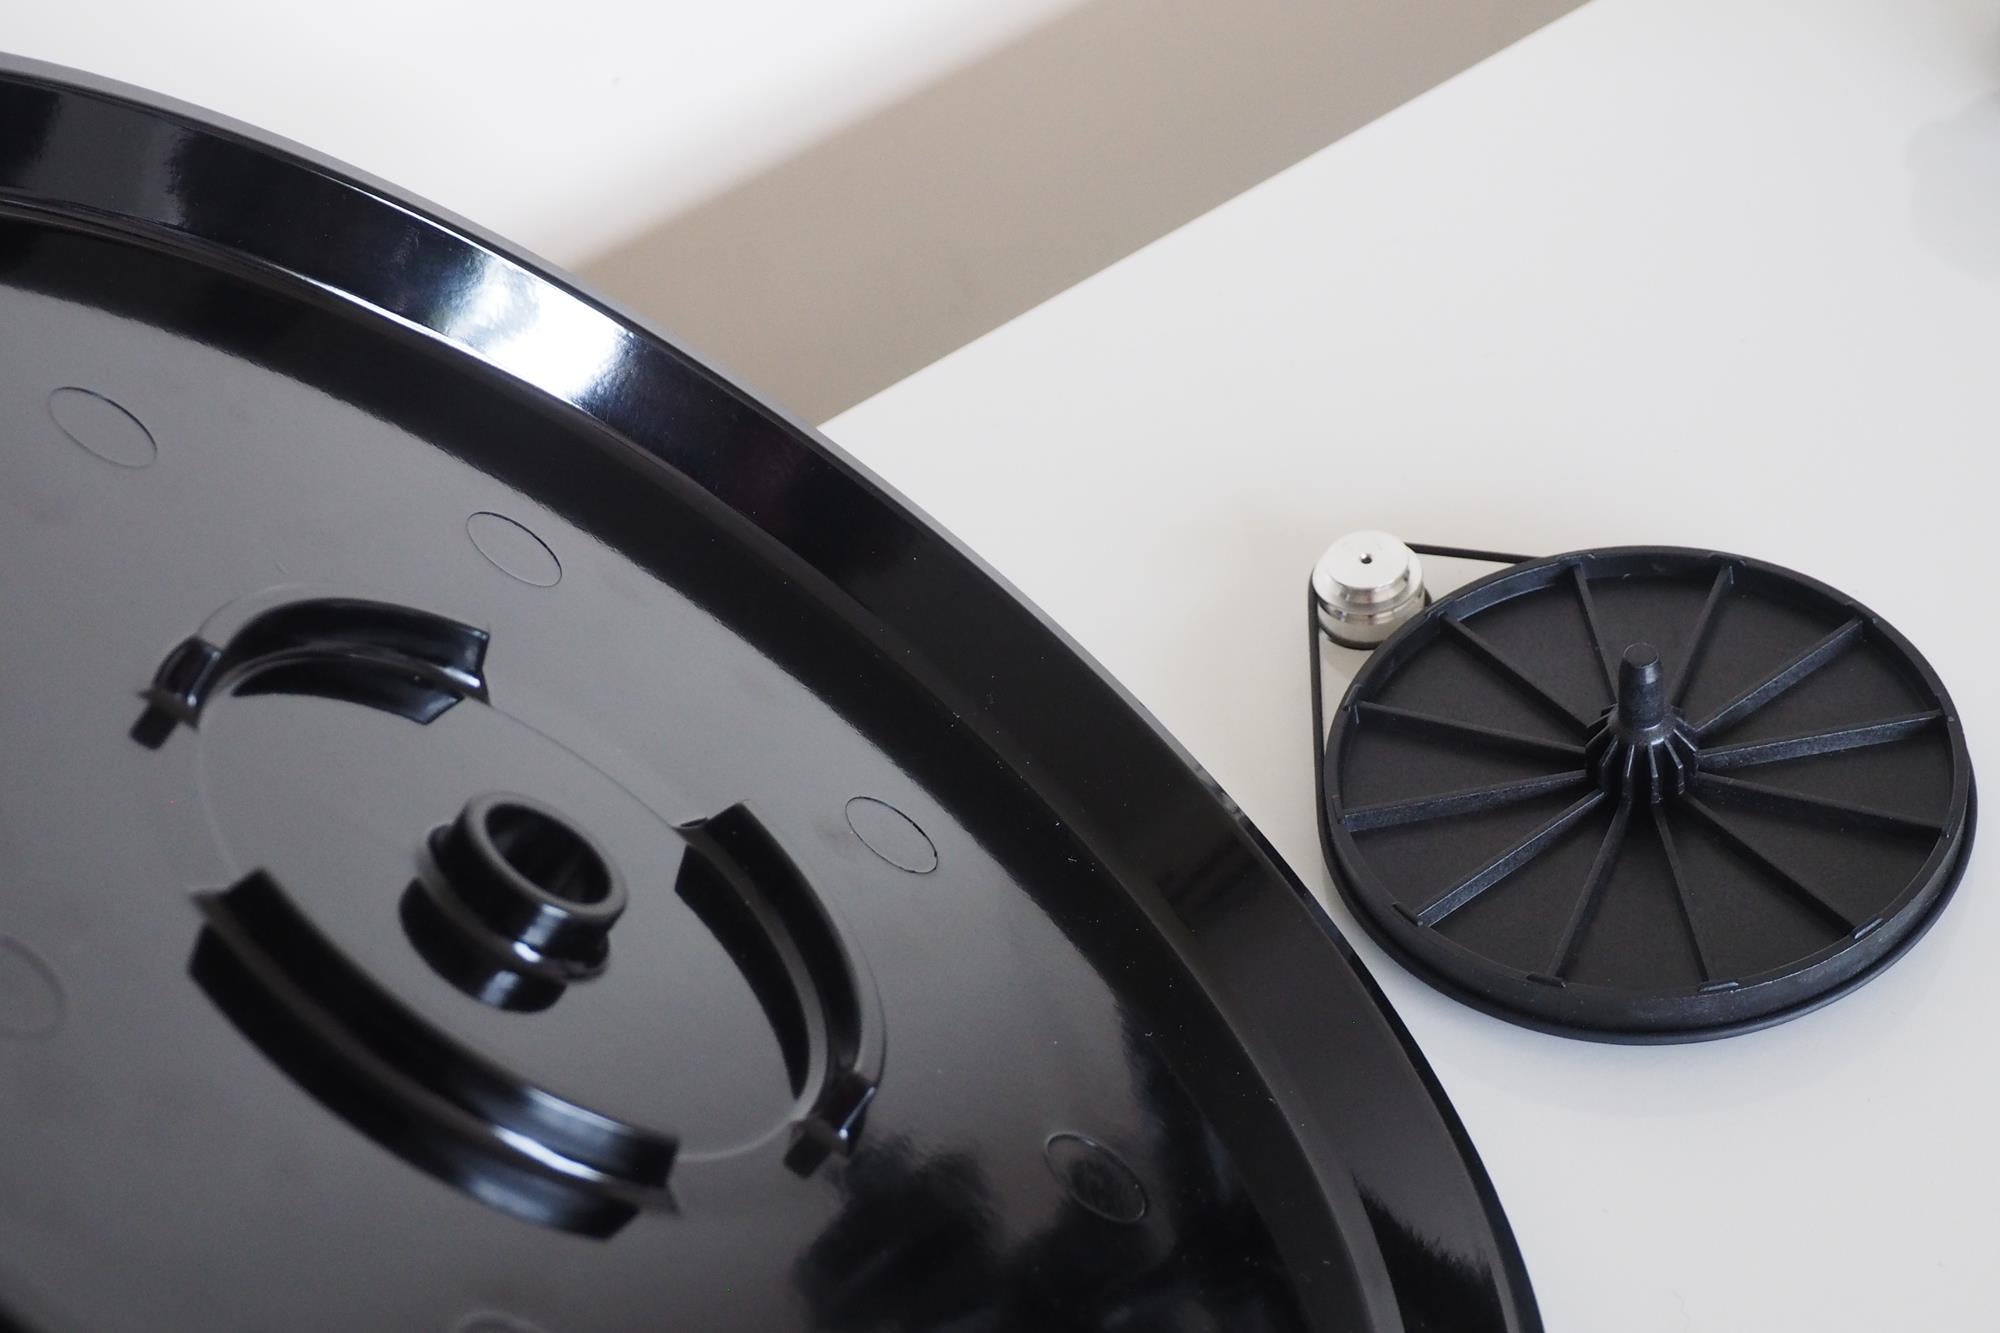 Close-up of Rega Planar 1 turntable platter and counterweight.